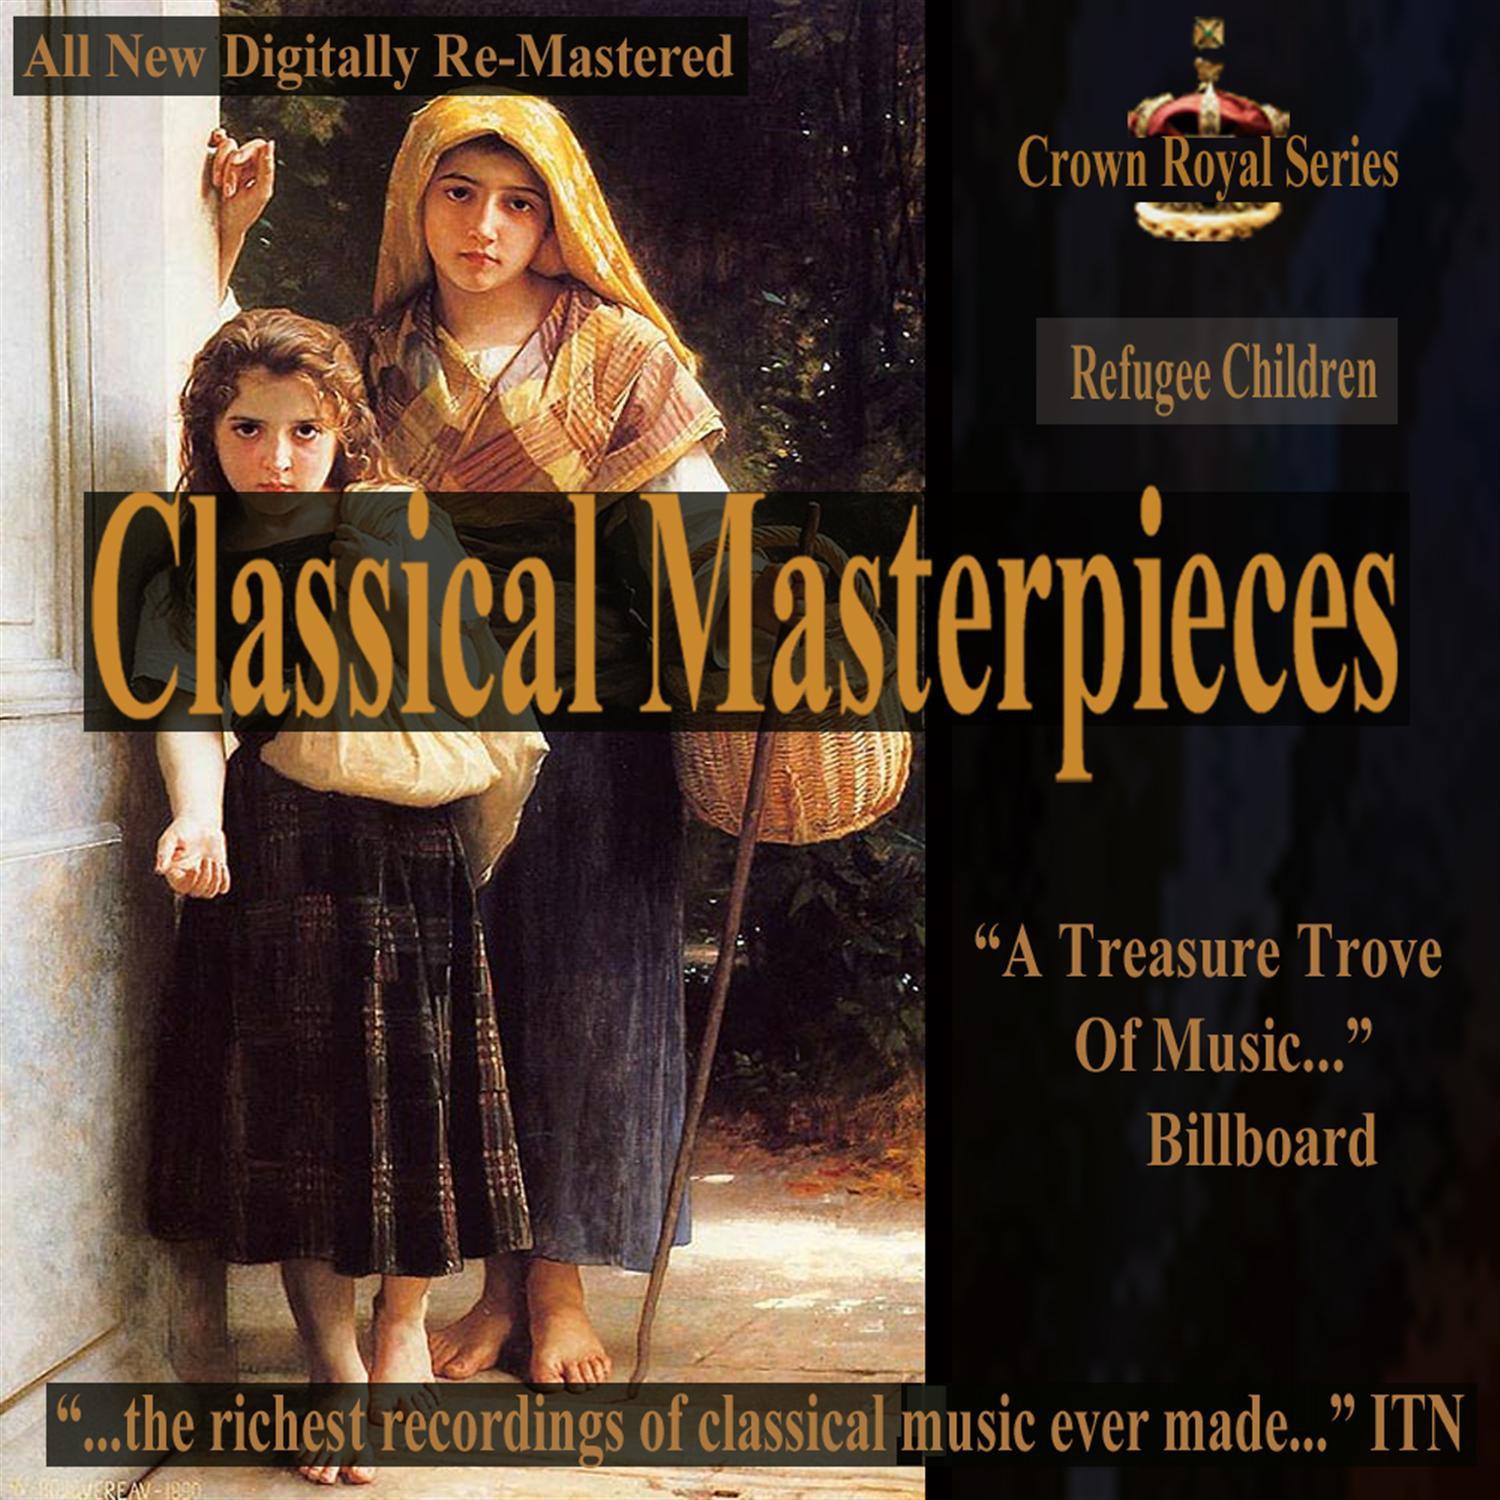 Concerto for Keyboard and Orchestra No. 20 in D Minor, K. 466, II. Romance, Part 2